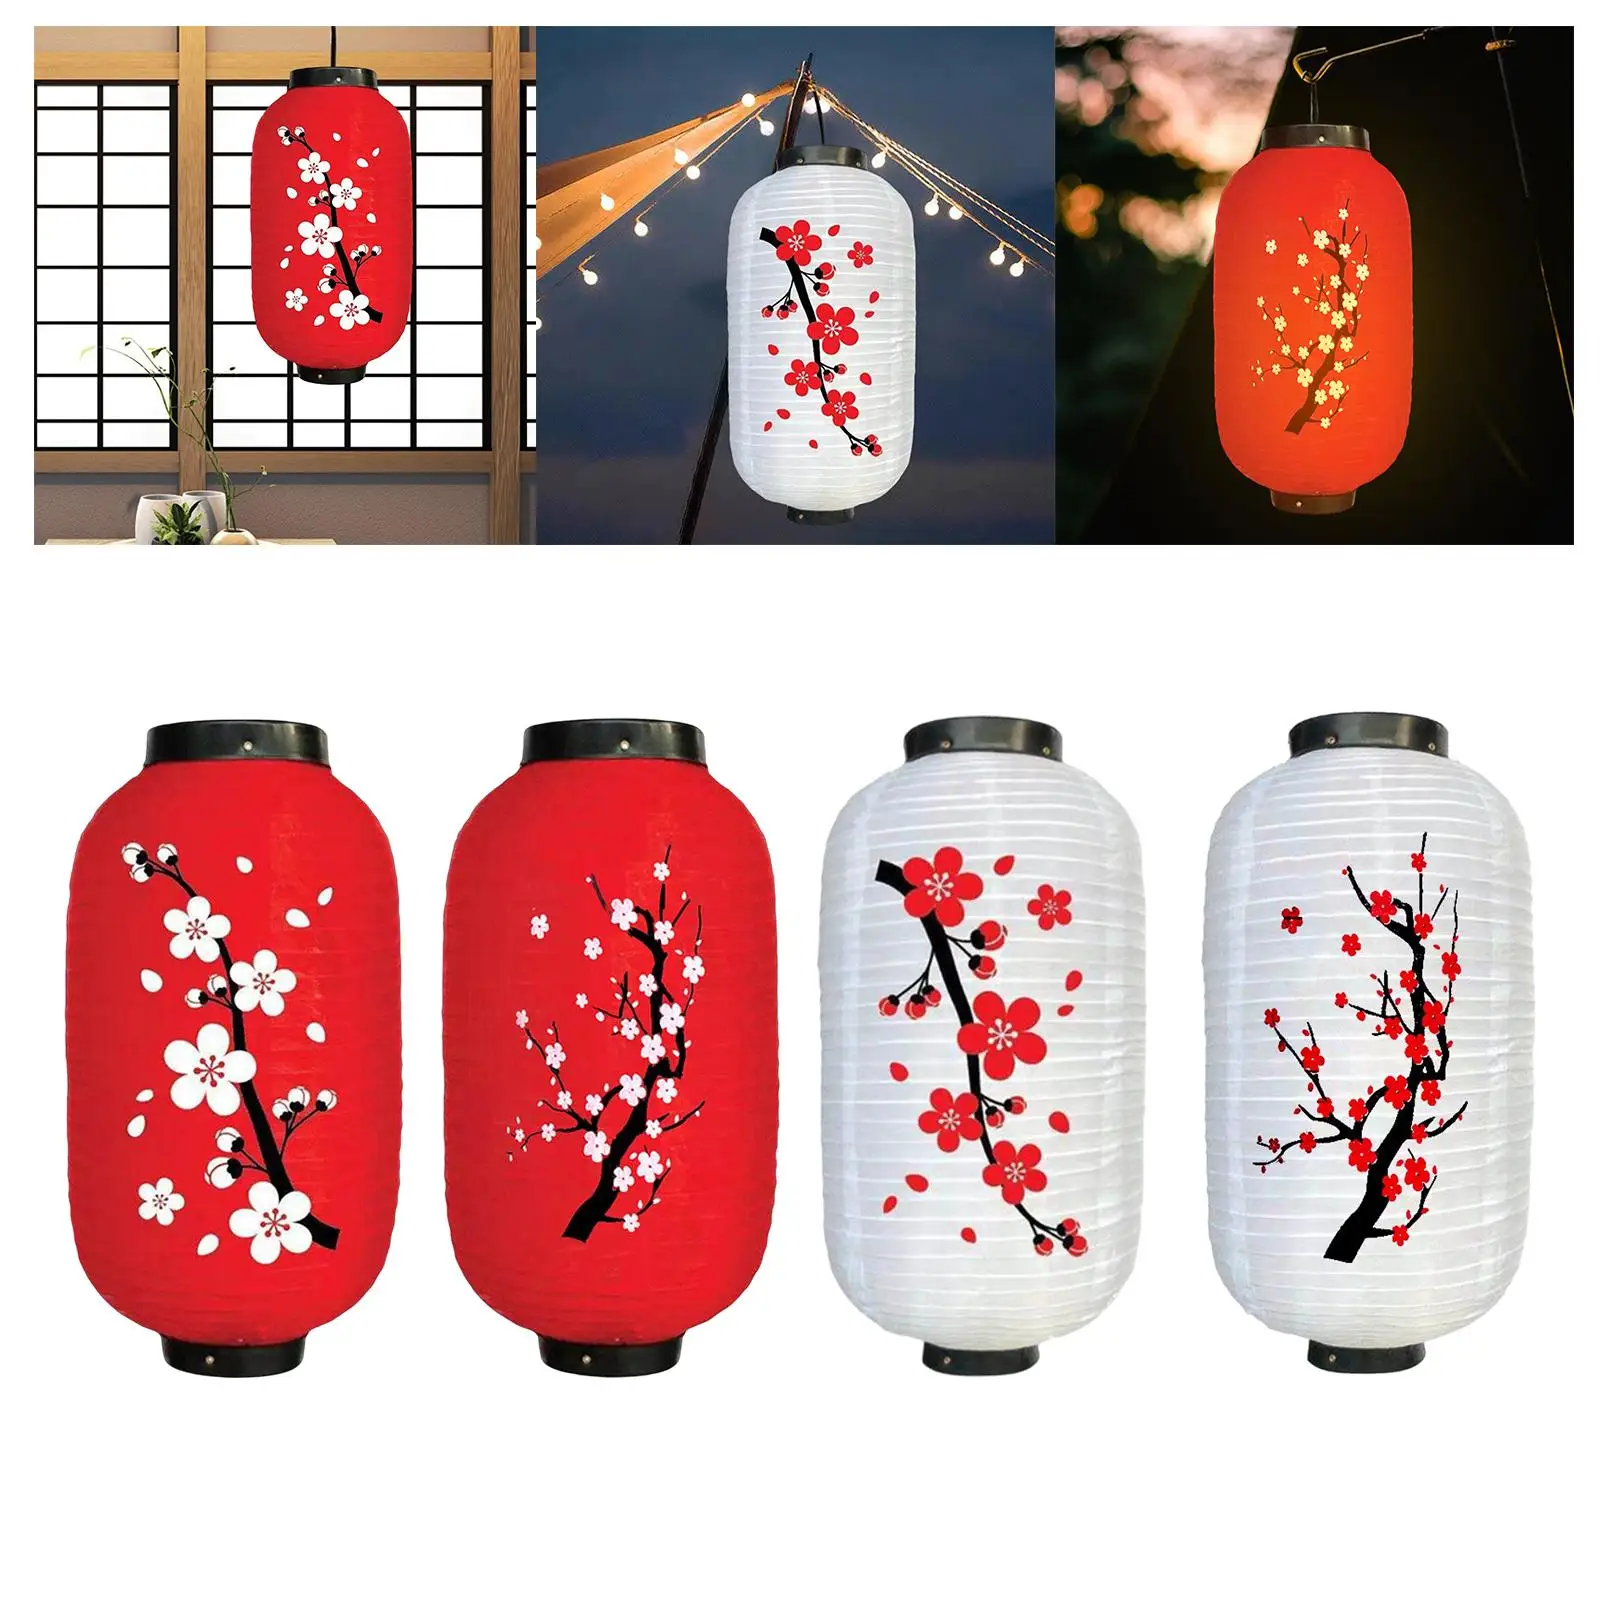 Traditional Japanese Style Lantern Decorative Hanging Cloth Lights Japanese Eateries Decor for Party Indoor Bar Outdoor Birthday